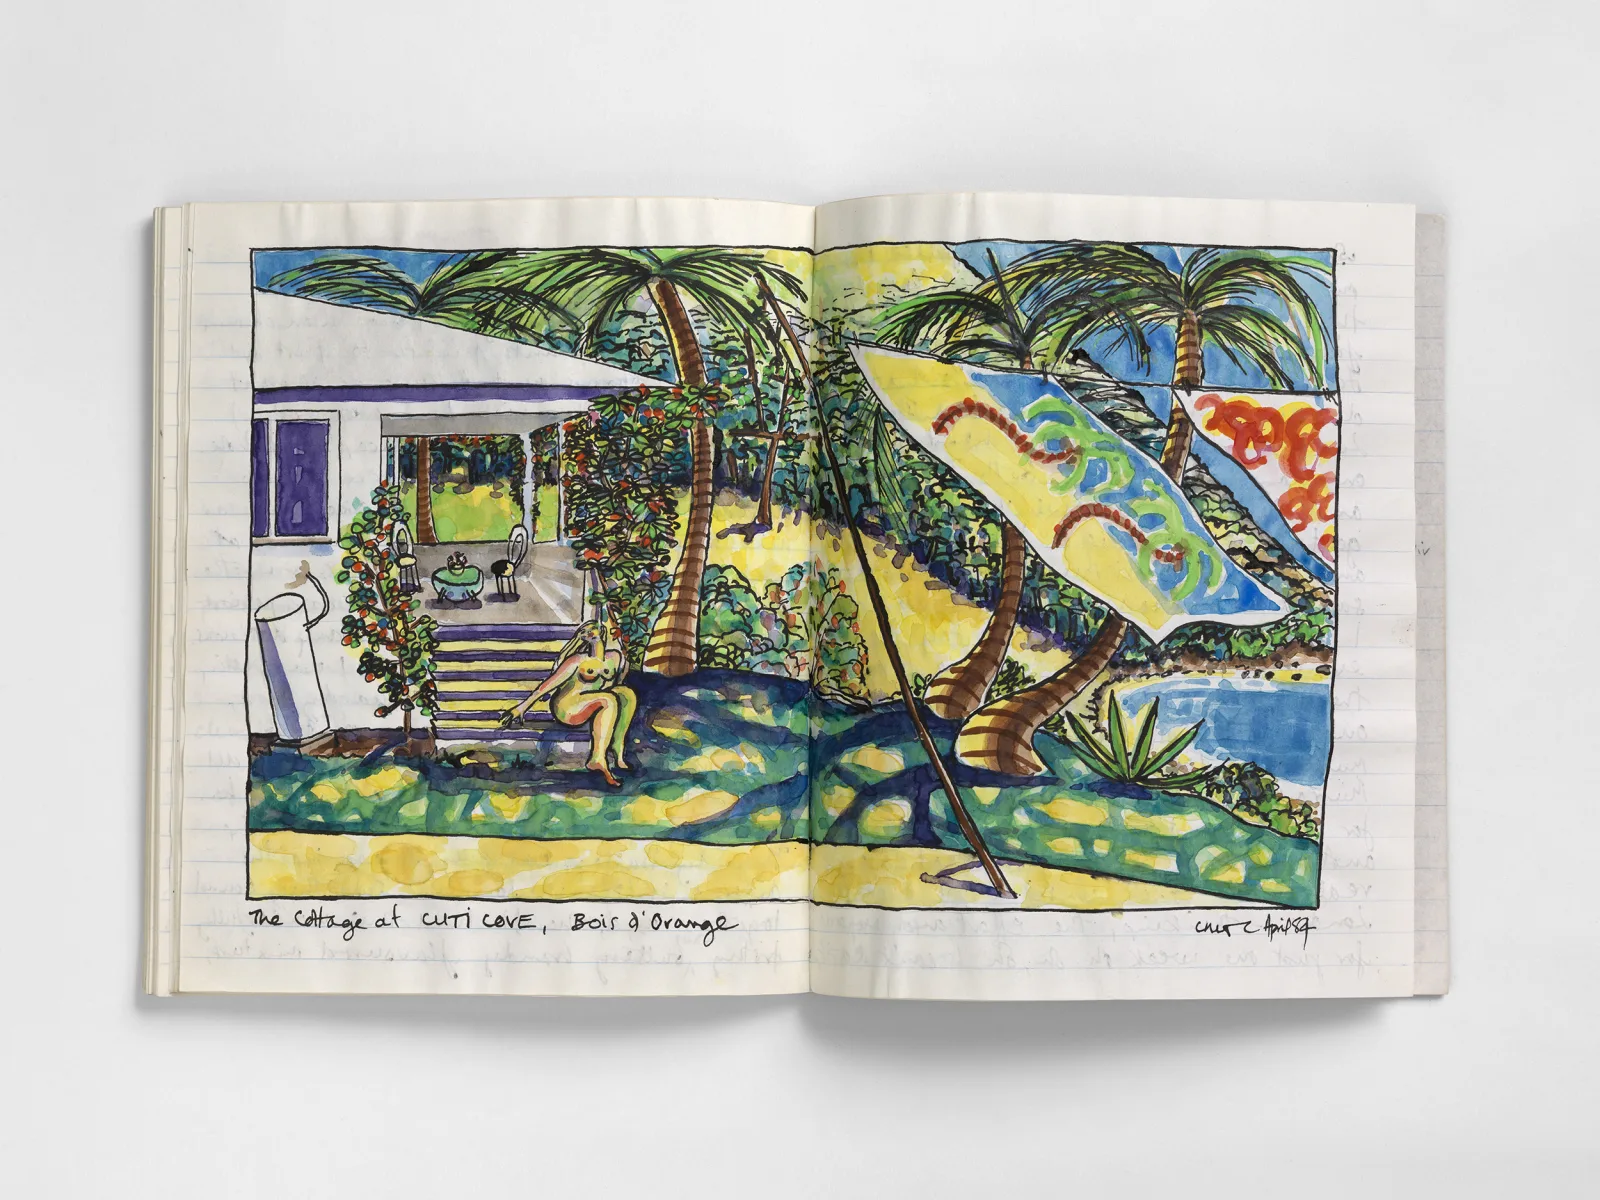 <p>Caroline Coon, St Lucia, 1984 - Personal Diary </p>